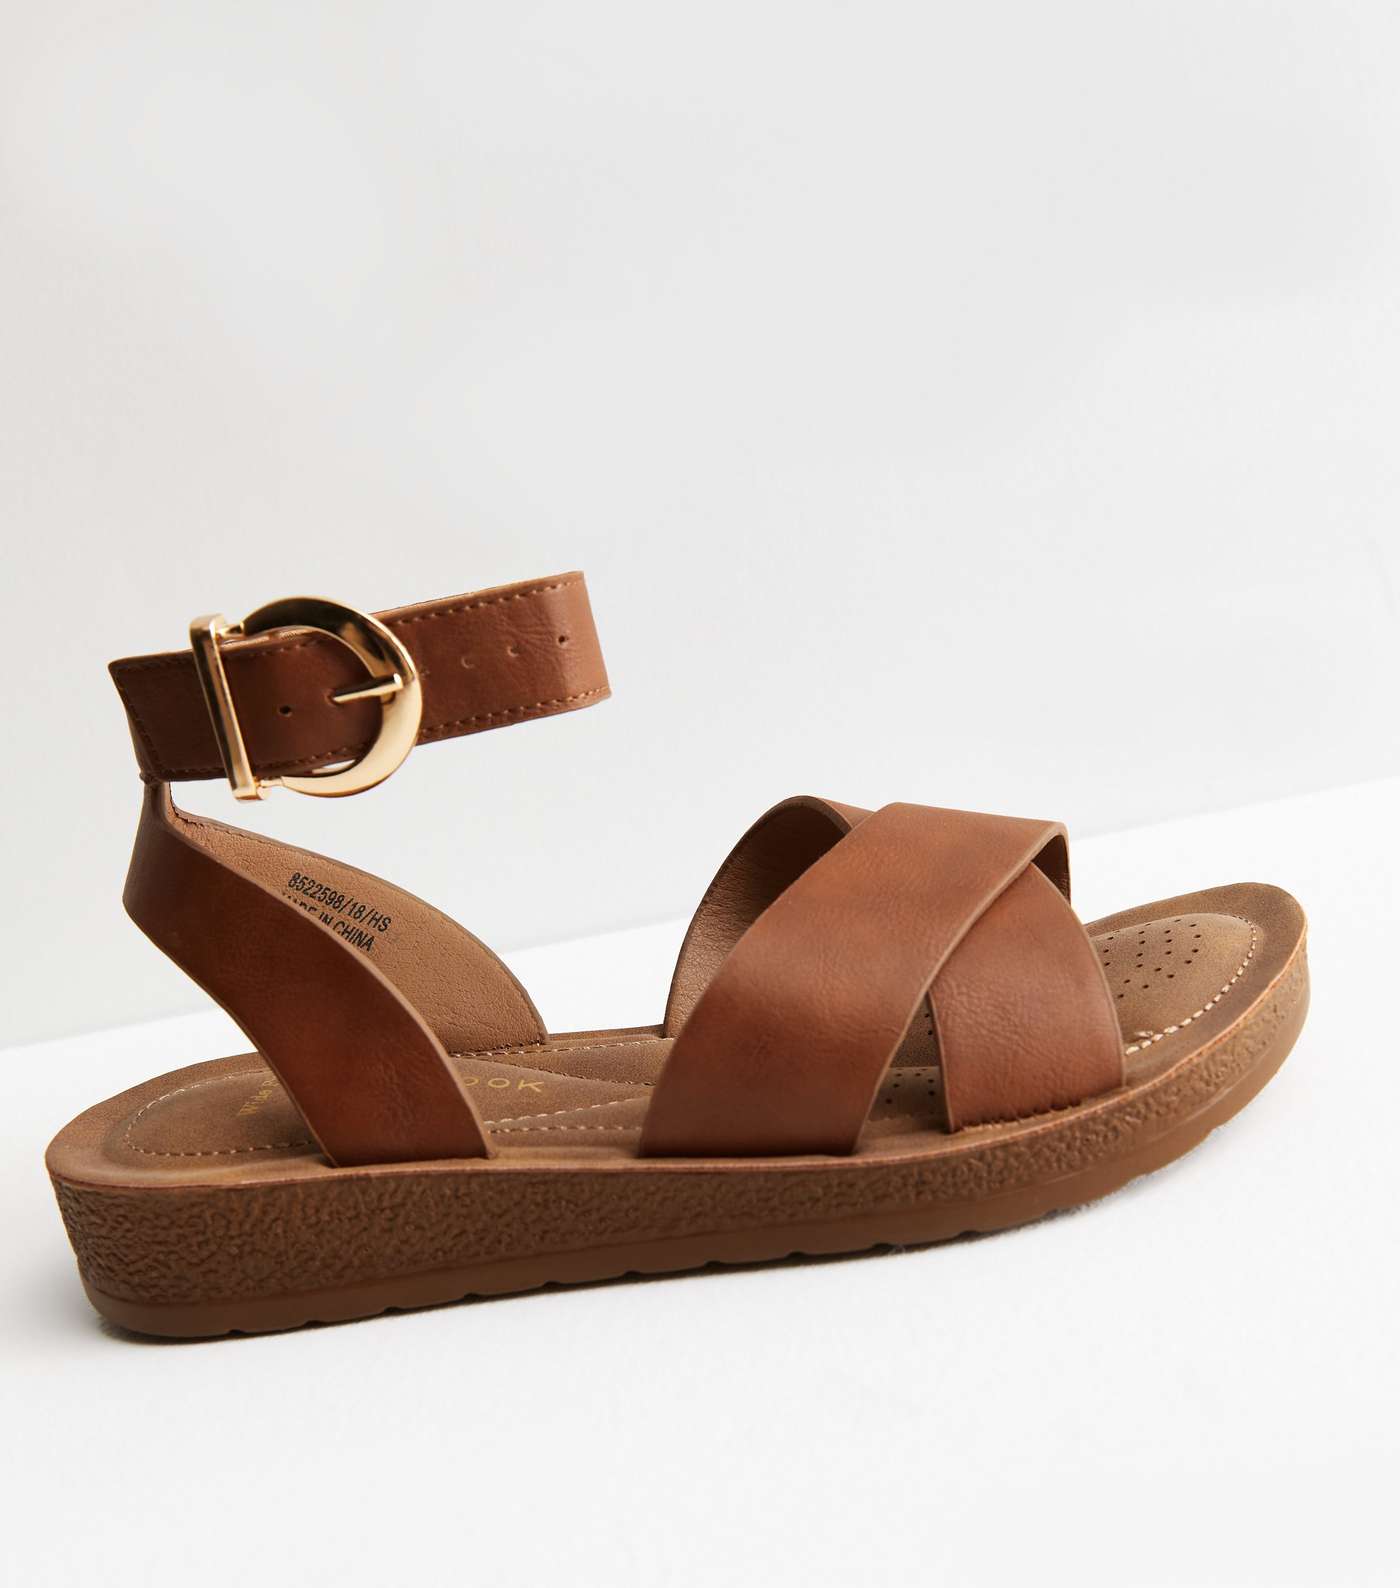 Wide Fit Tan Leather-Look Cross Strap Footbed Sandals Image 3